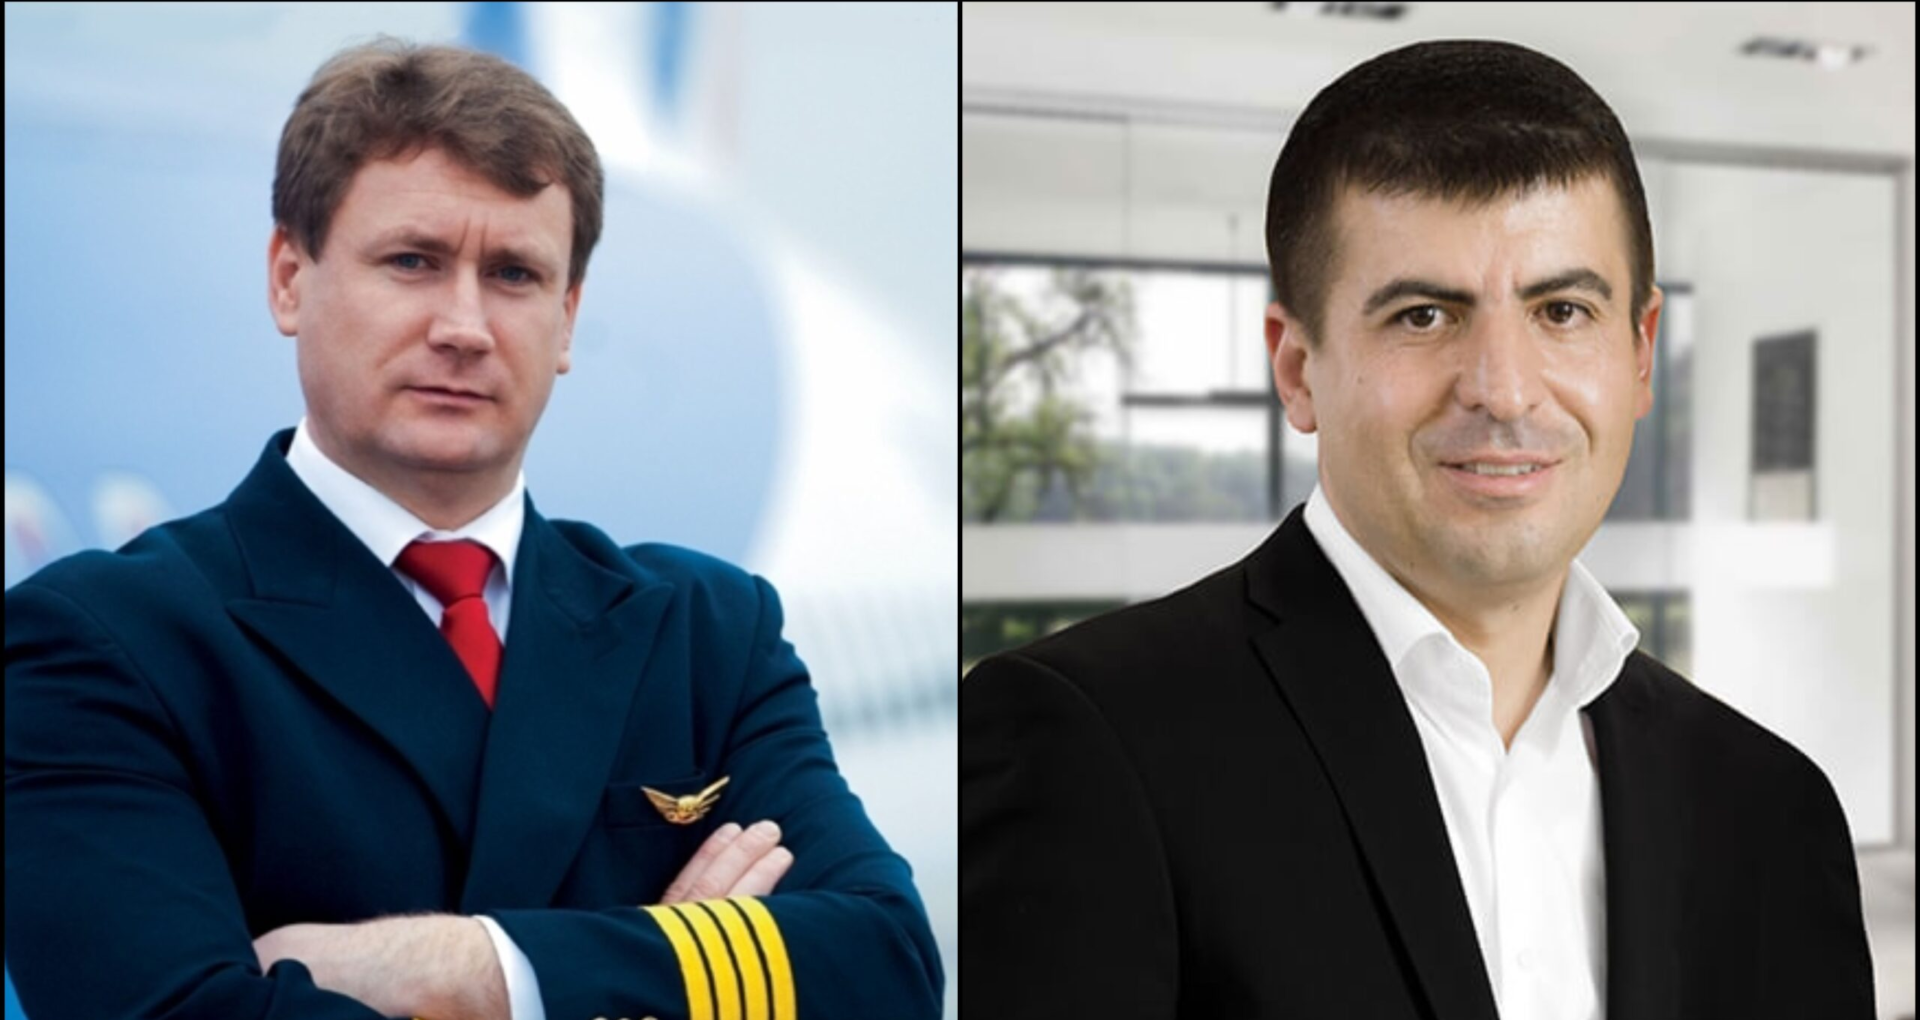 General Director and Deputy Director of the State Enterprise “Air Moldova” Airline Company, sentenced for exceeding their duties